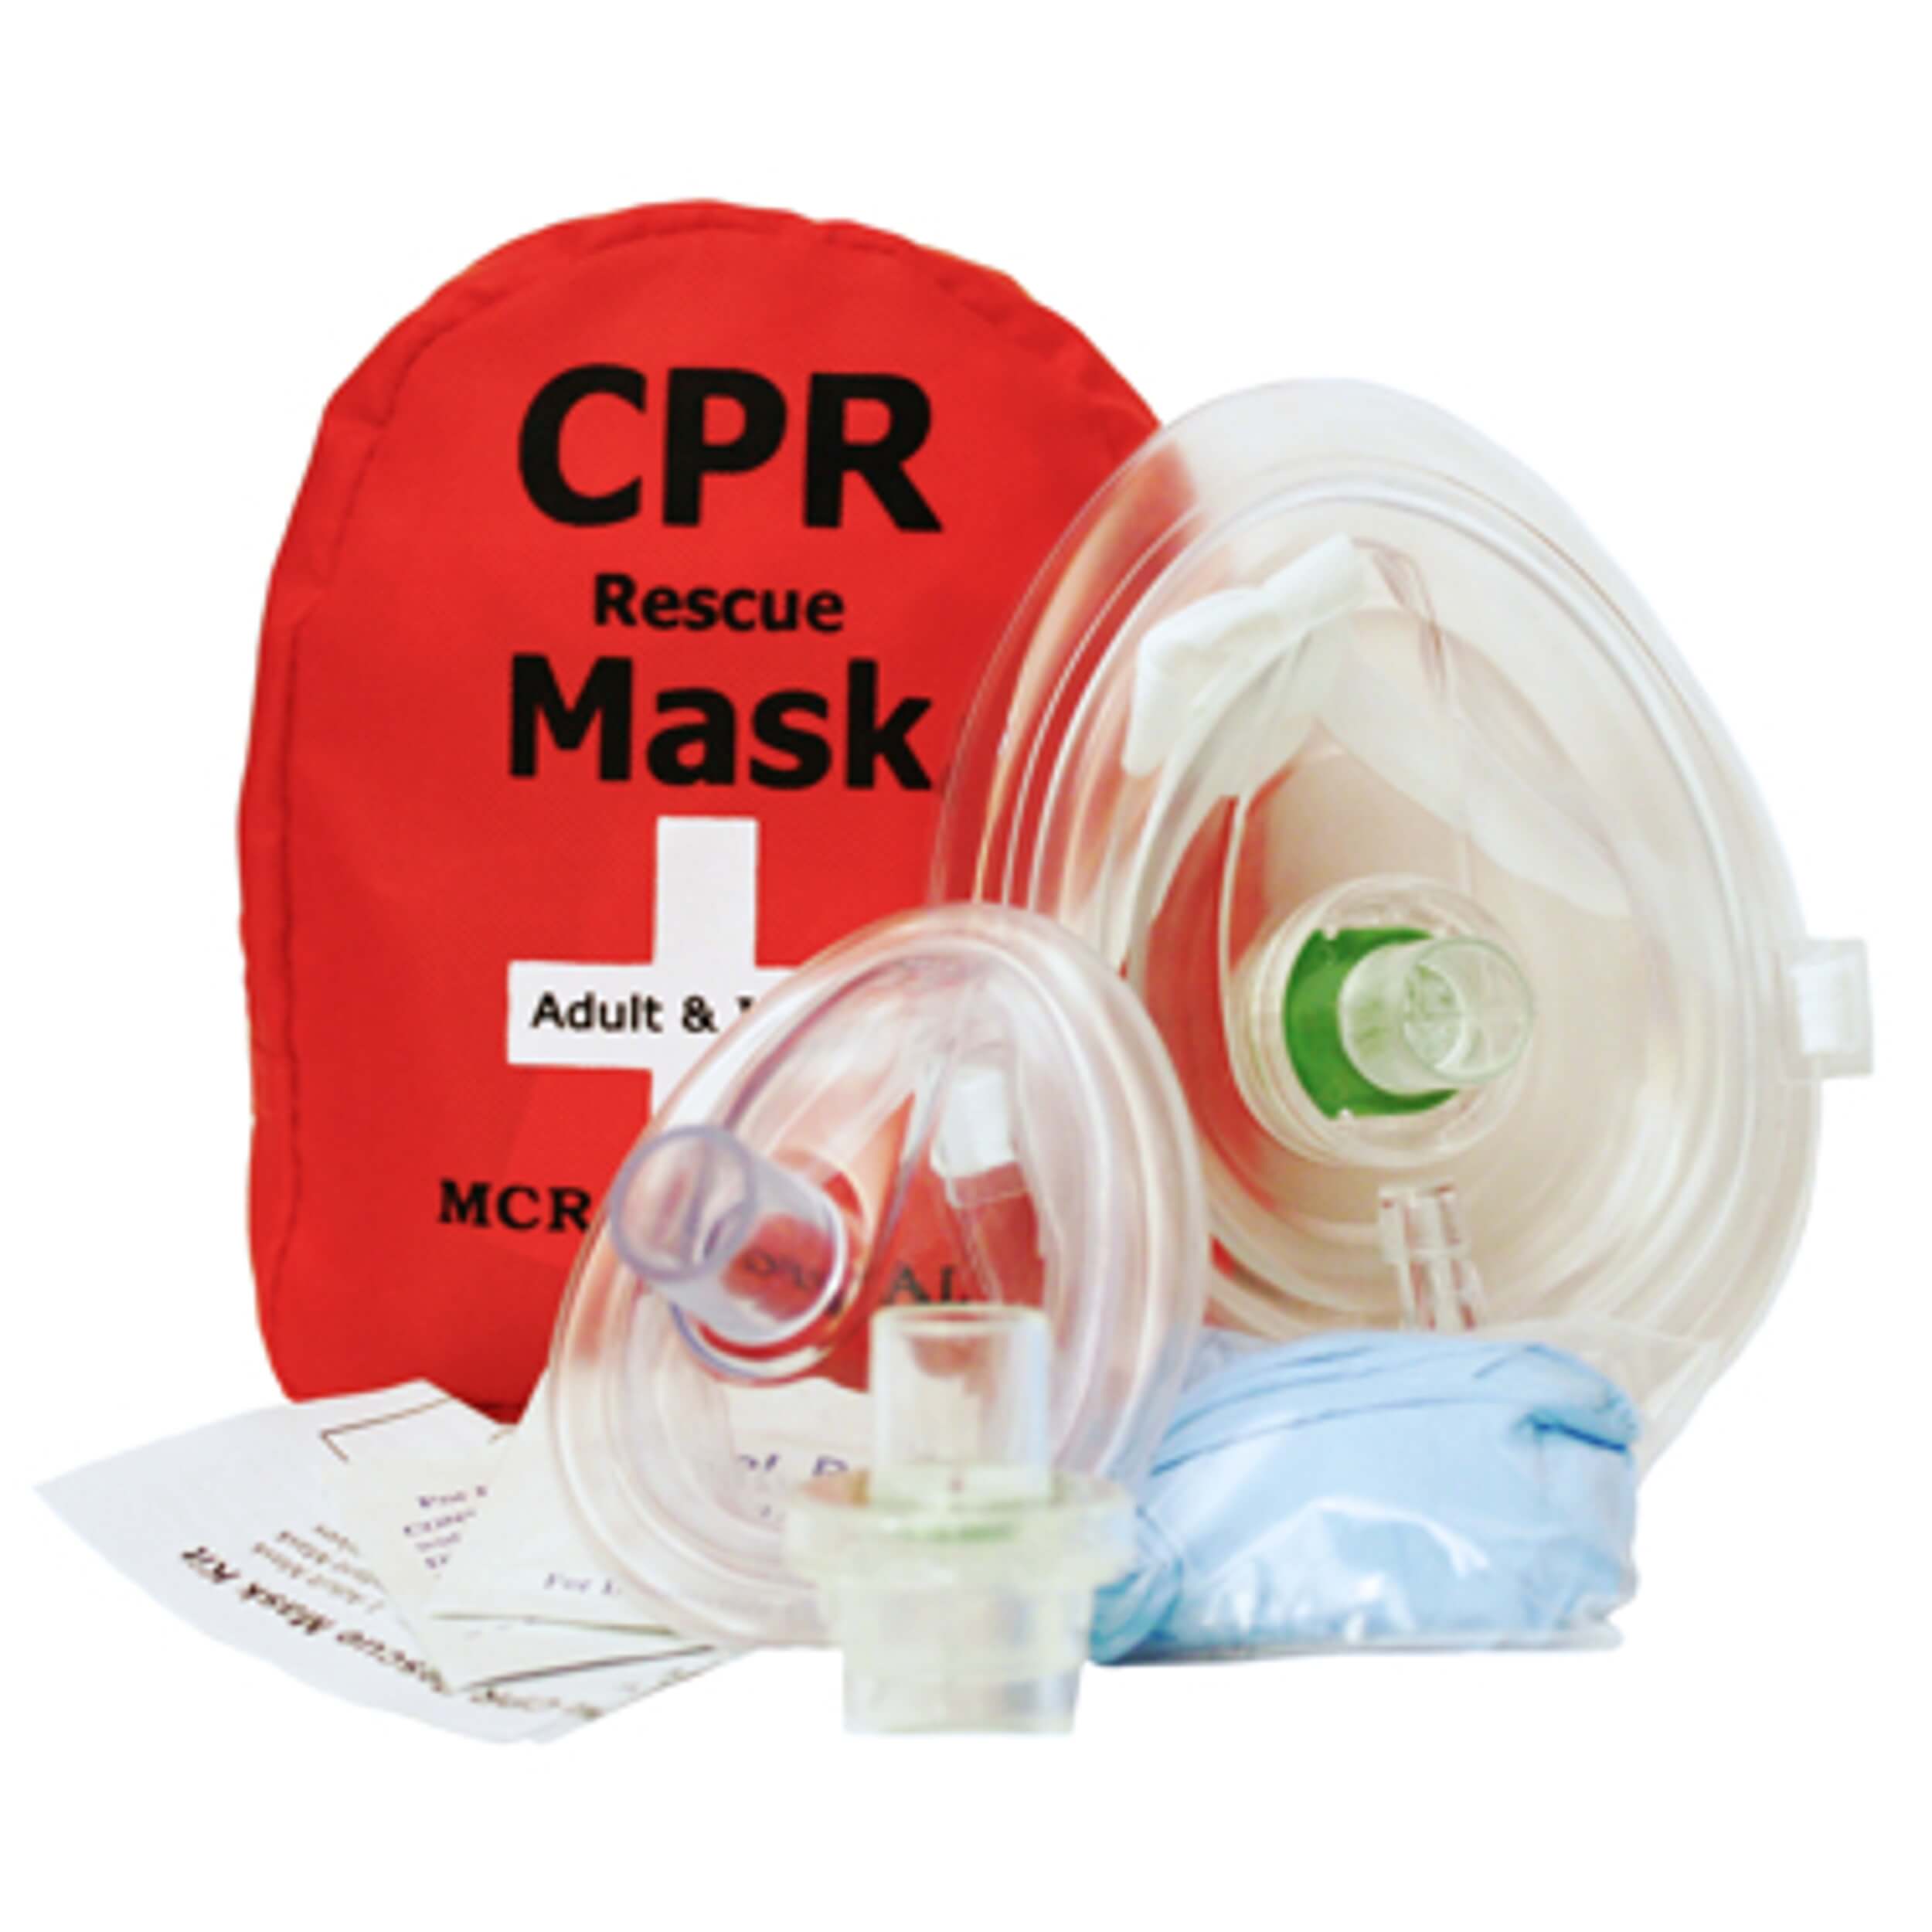 https://www.mcrmedical.com/mm5/graphics/00000001/RM-2071-001-CPR-Rescue-mask-adult-child-and-infant-in-case.jpg